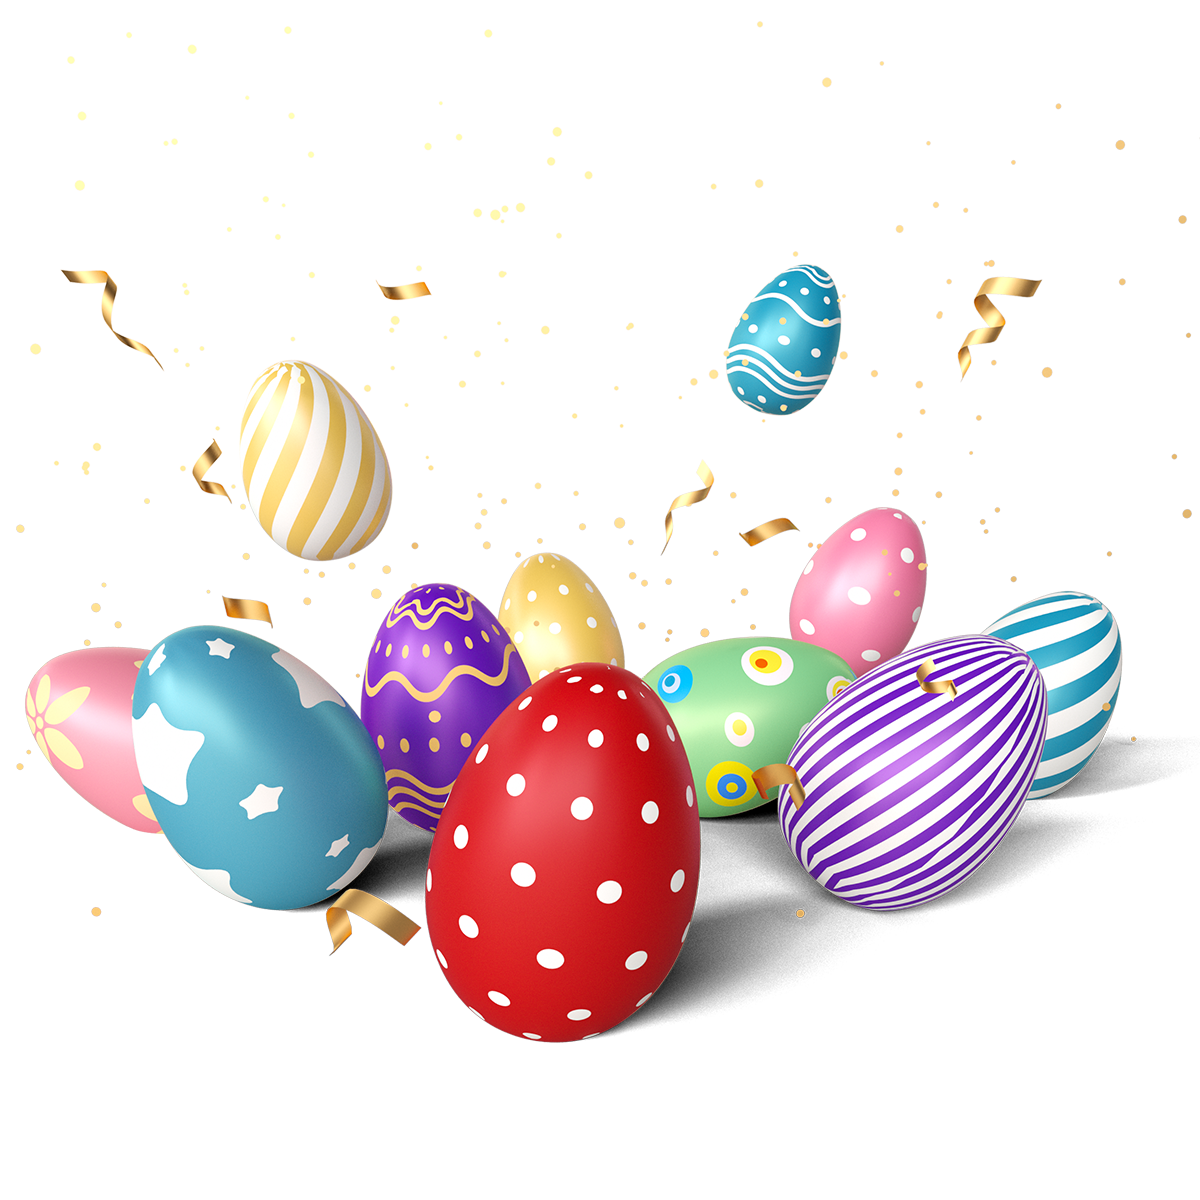 Pngtreeeaster eggs_7513887png